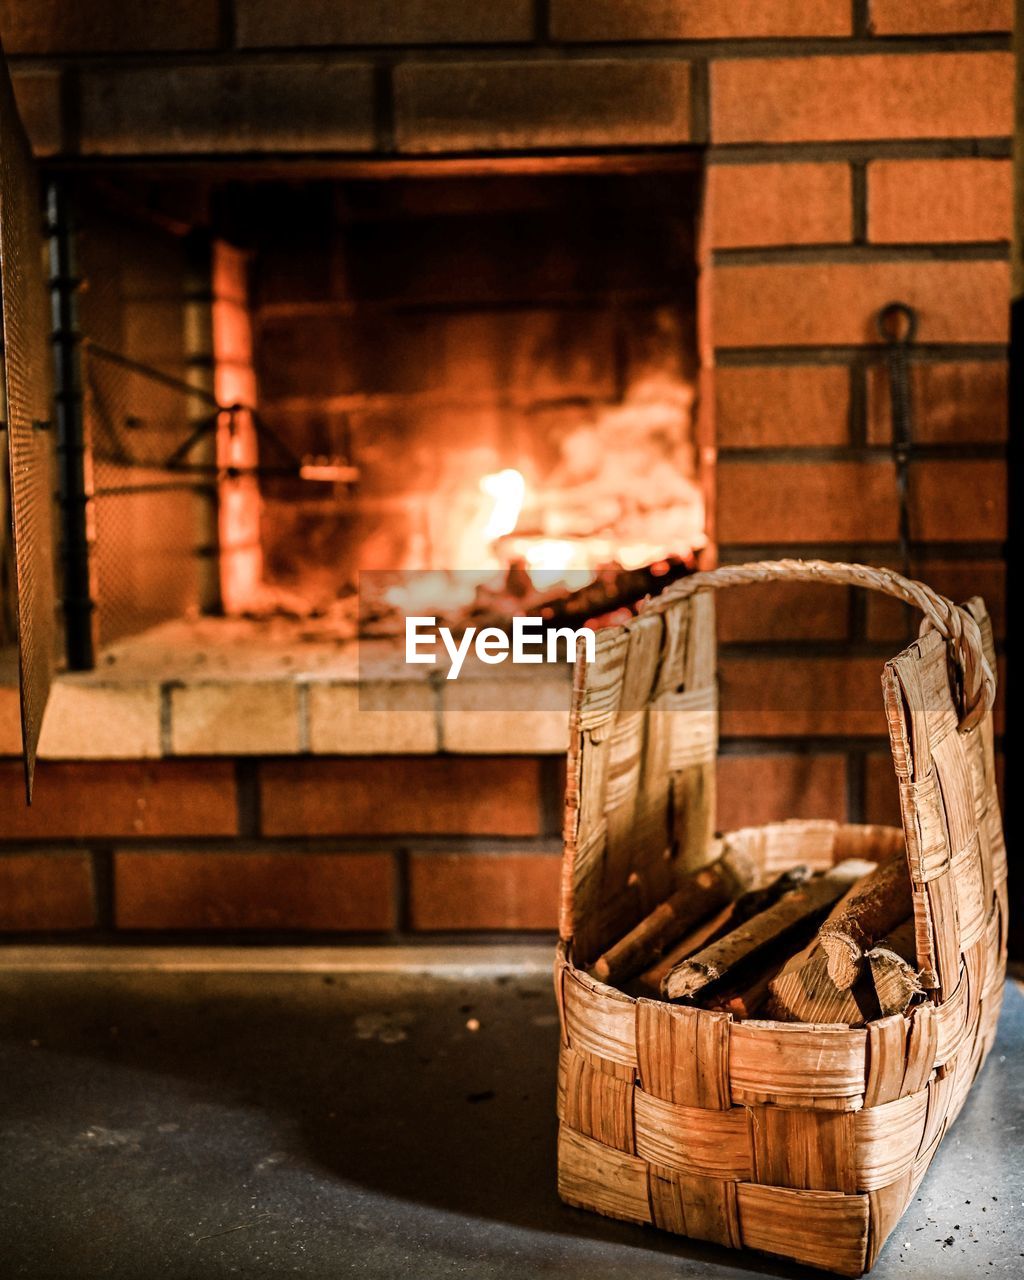 Firewood in wicker basket on table against fireplace at home